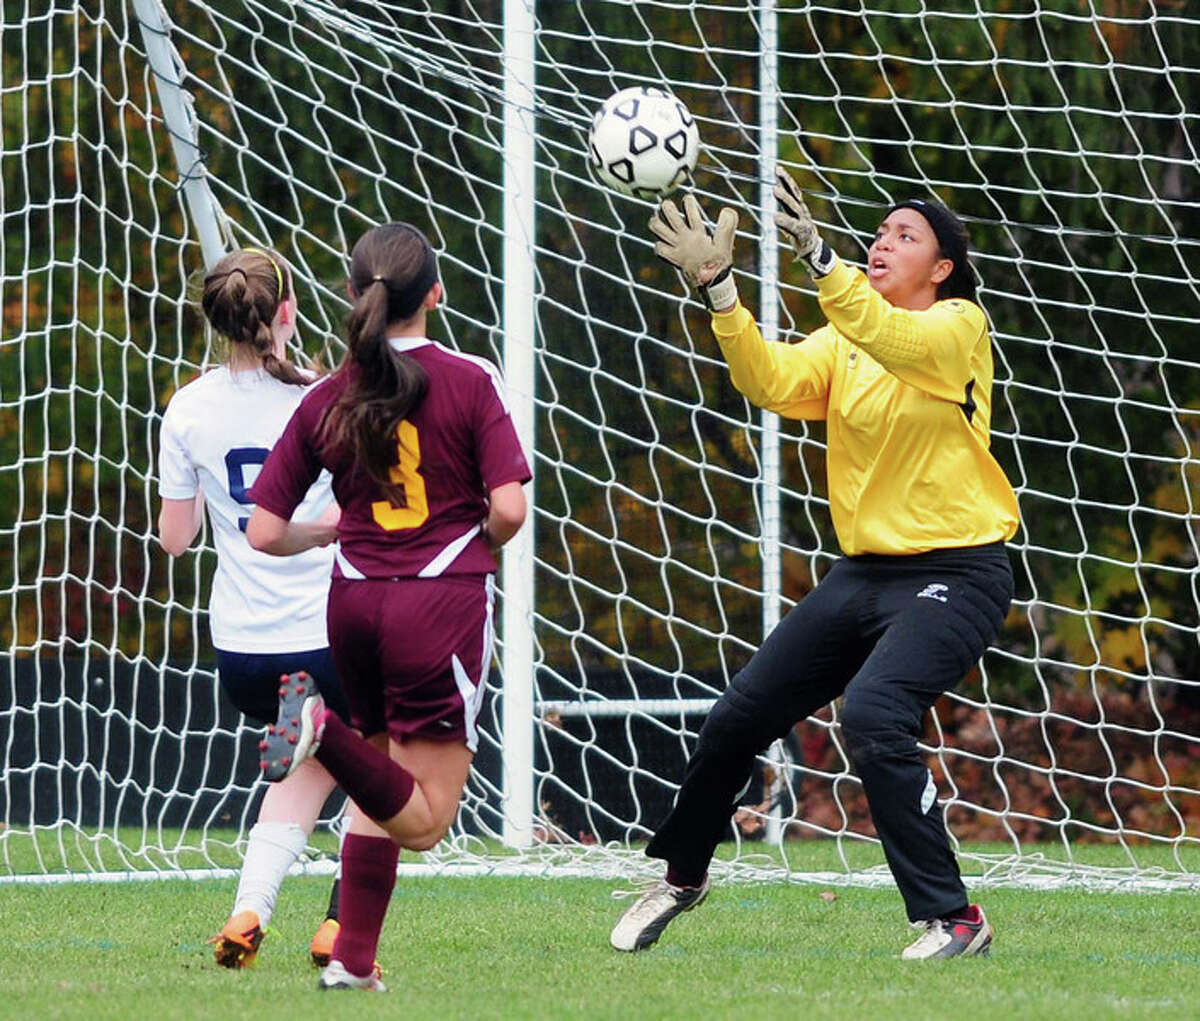 Joelle MarkAnthony makes a save during Sheehan’s penalty-kick victory over Lauralton Hall in the Class M girls soccer tournament. Photo by Arnold Gold/New Haven Register